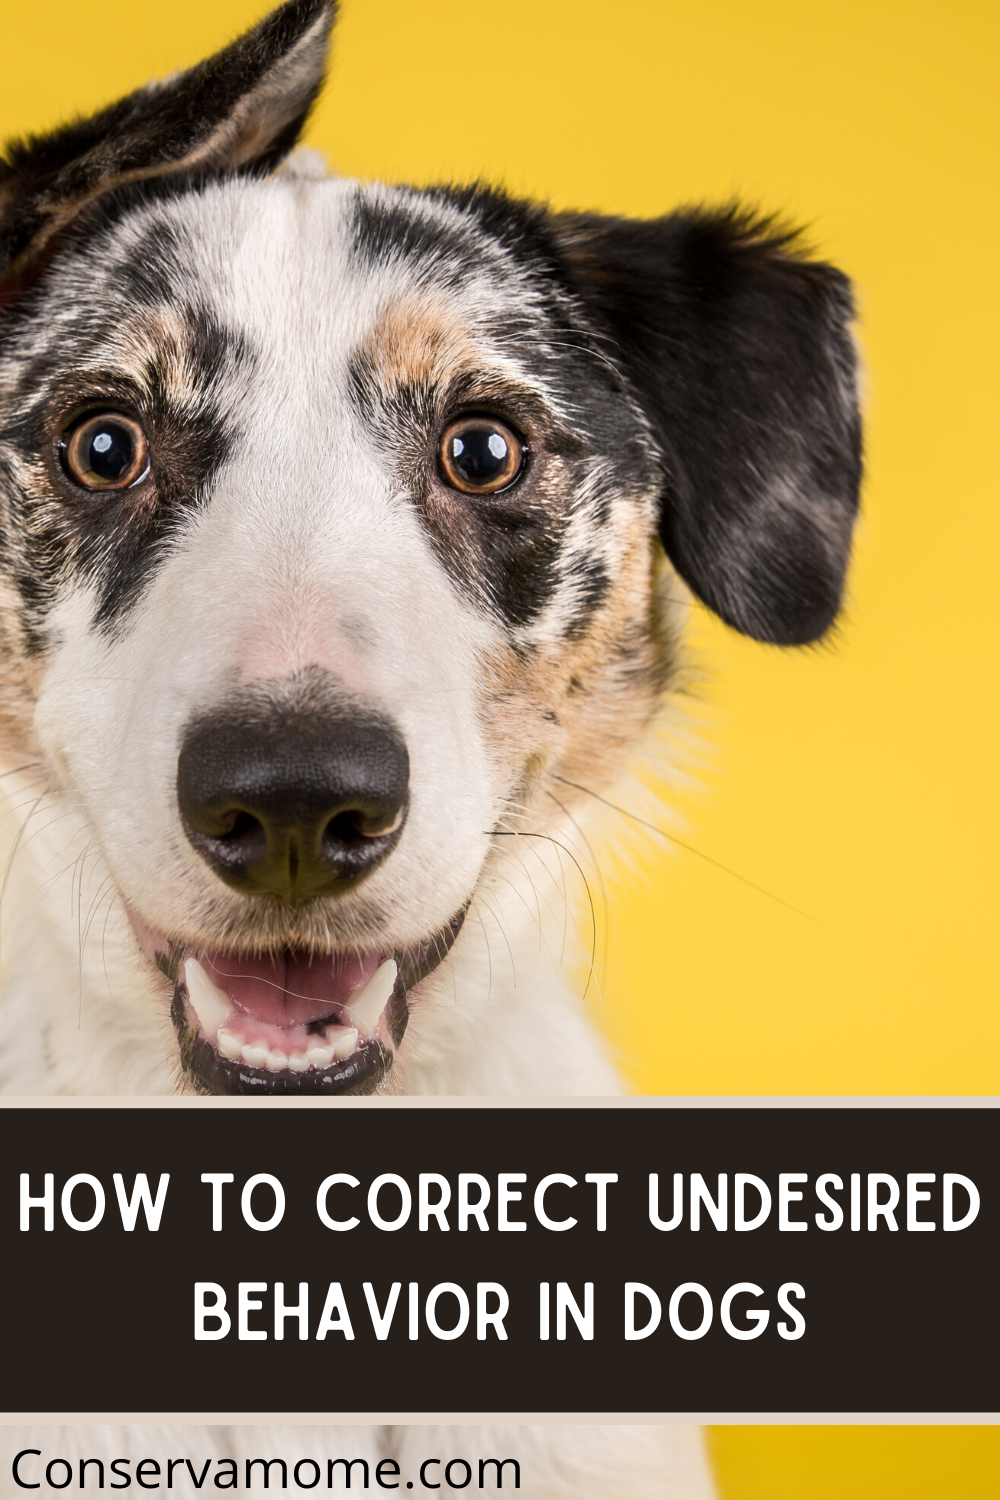 How To Correct Undesired Behavior in Dogs